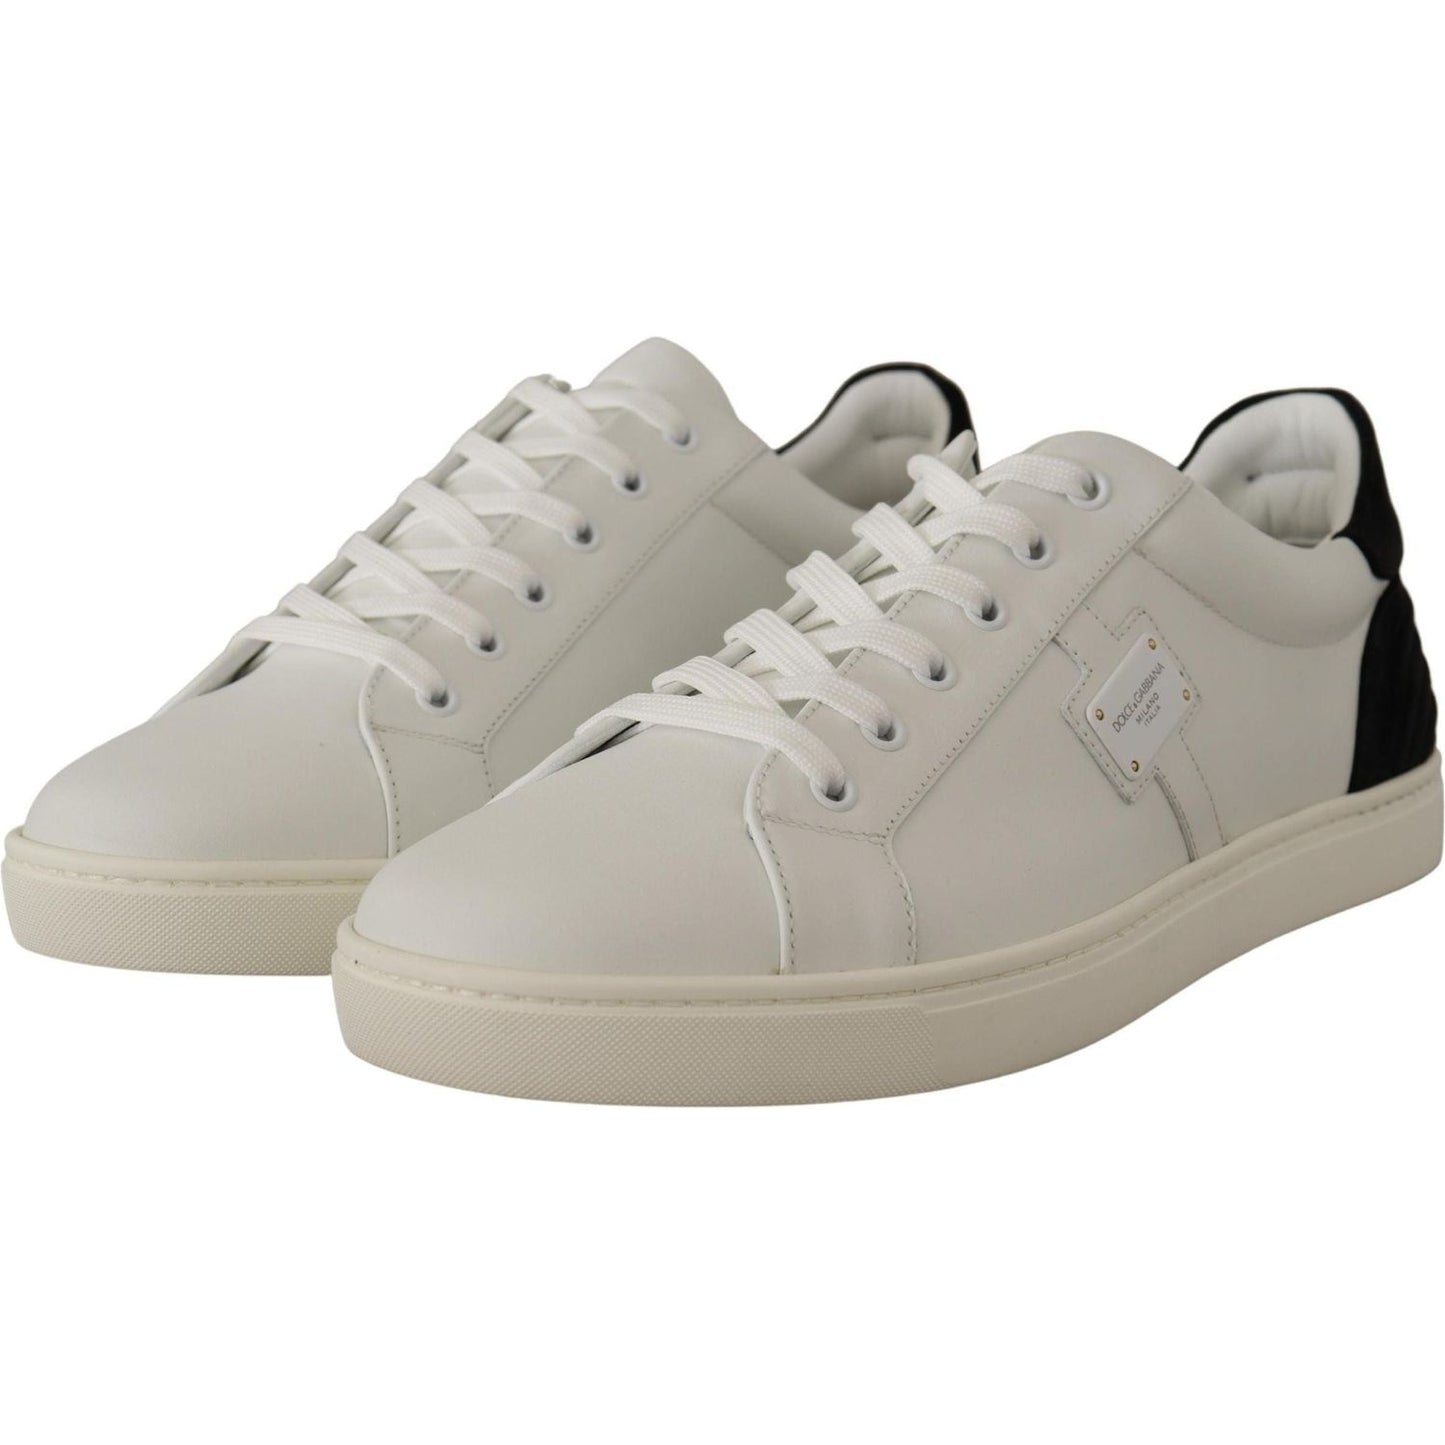 Dolce & Gabbana | White Suede Leather Low Tops Sneakers  | McRichard Designer Brands